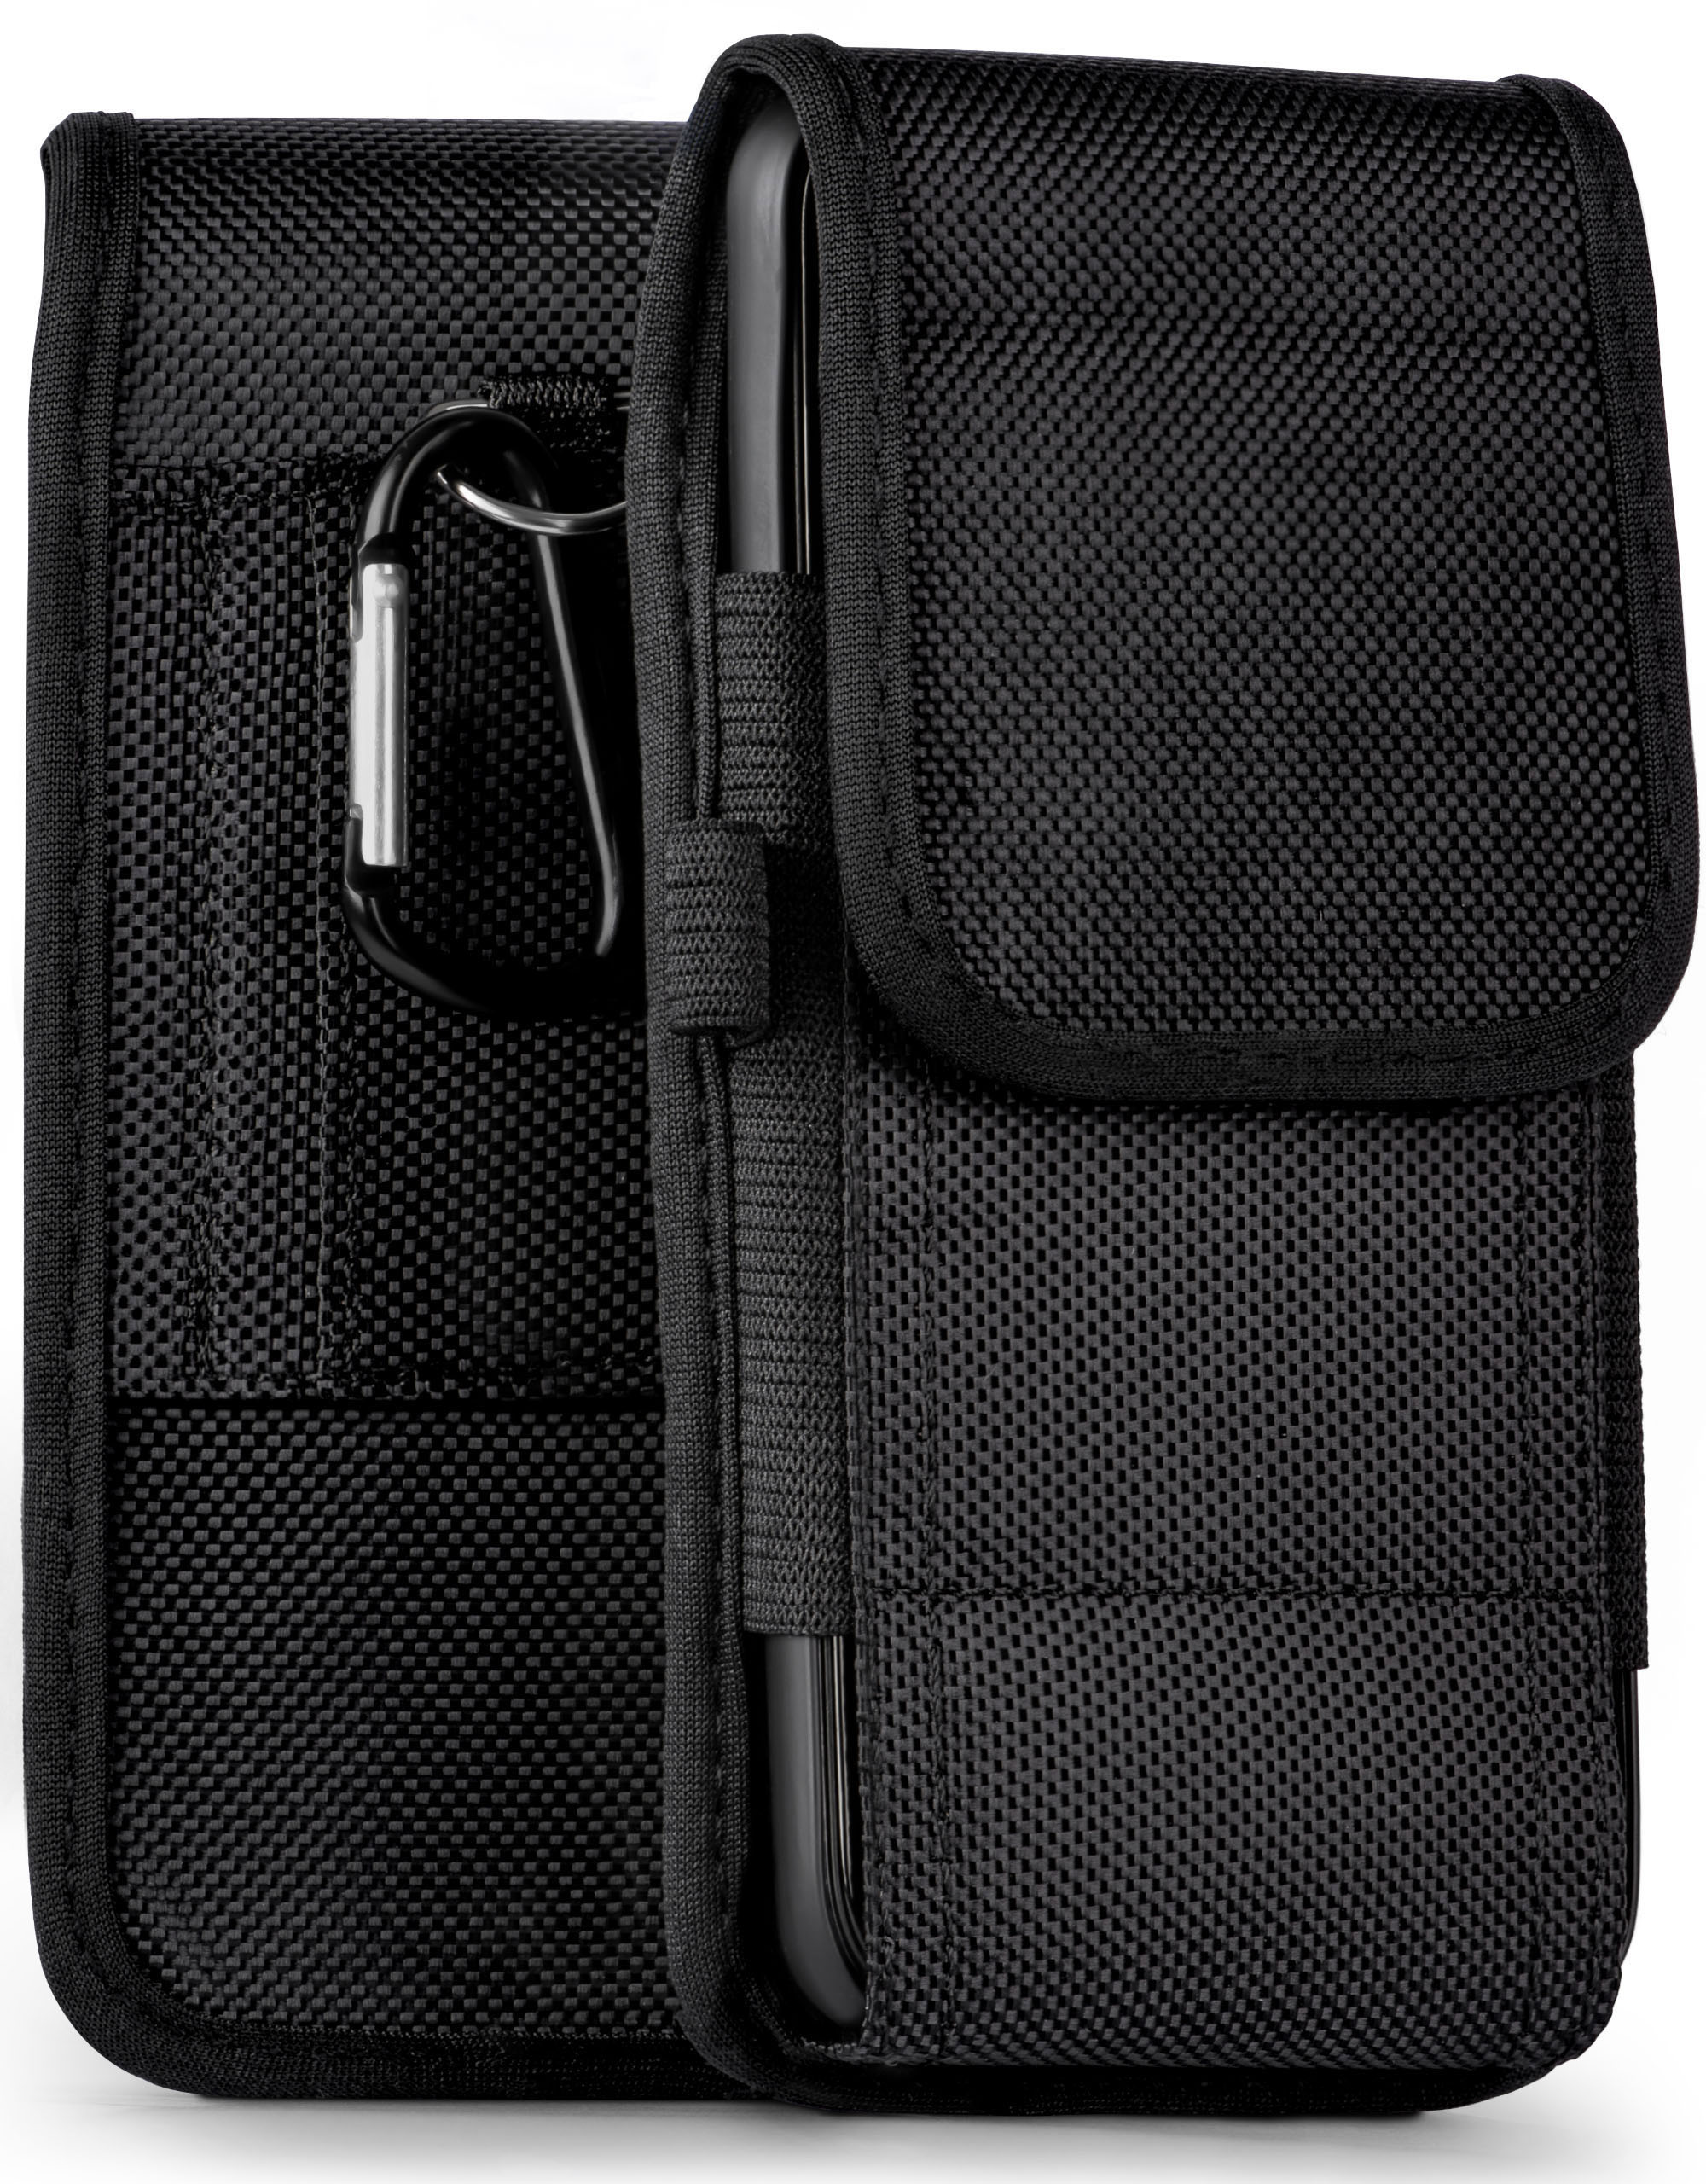 Holster, C10, Agility Sharp, Aquos Case, Trail MOEX